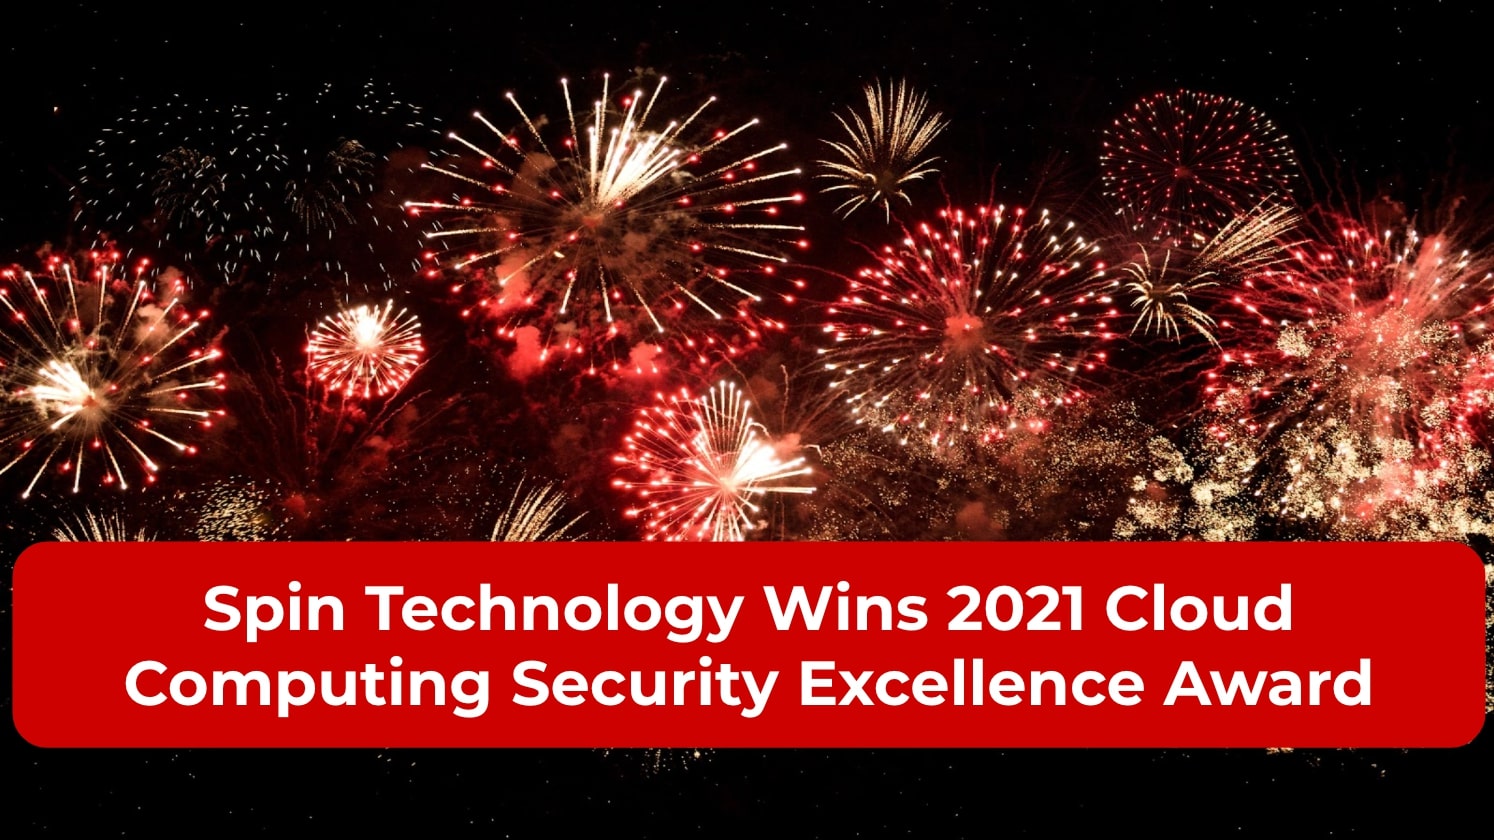 Spin Technology Wins 2021 Cloud Computing Security Excellence Award